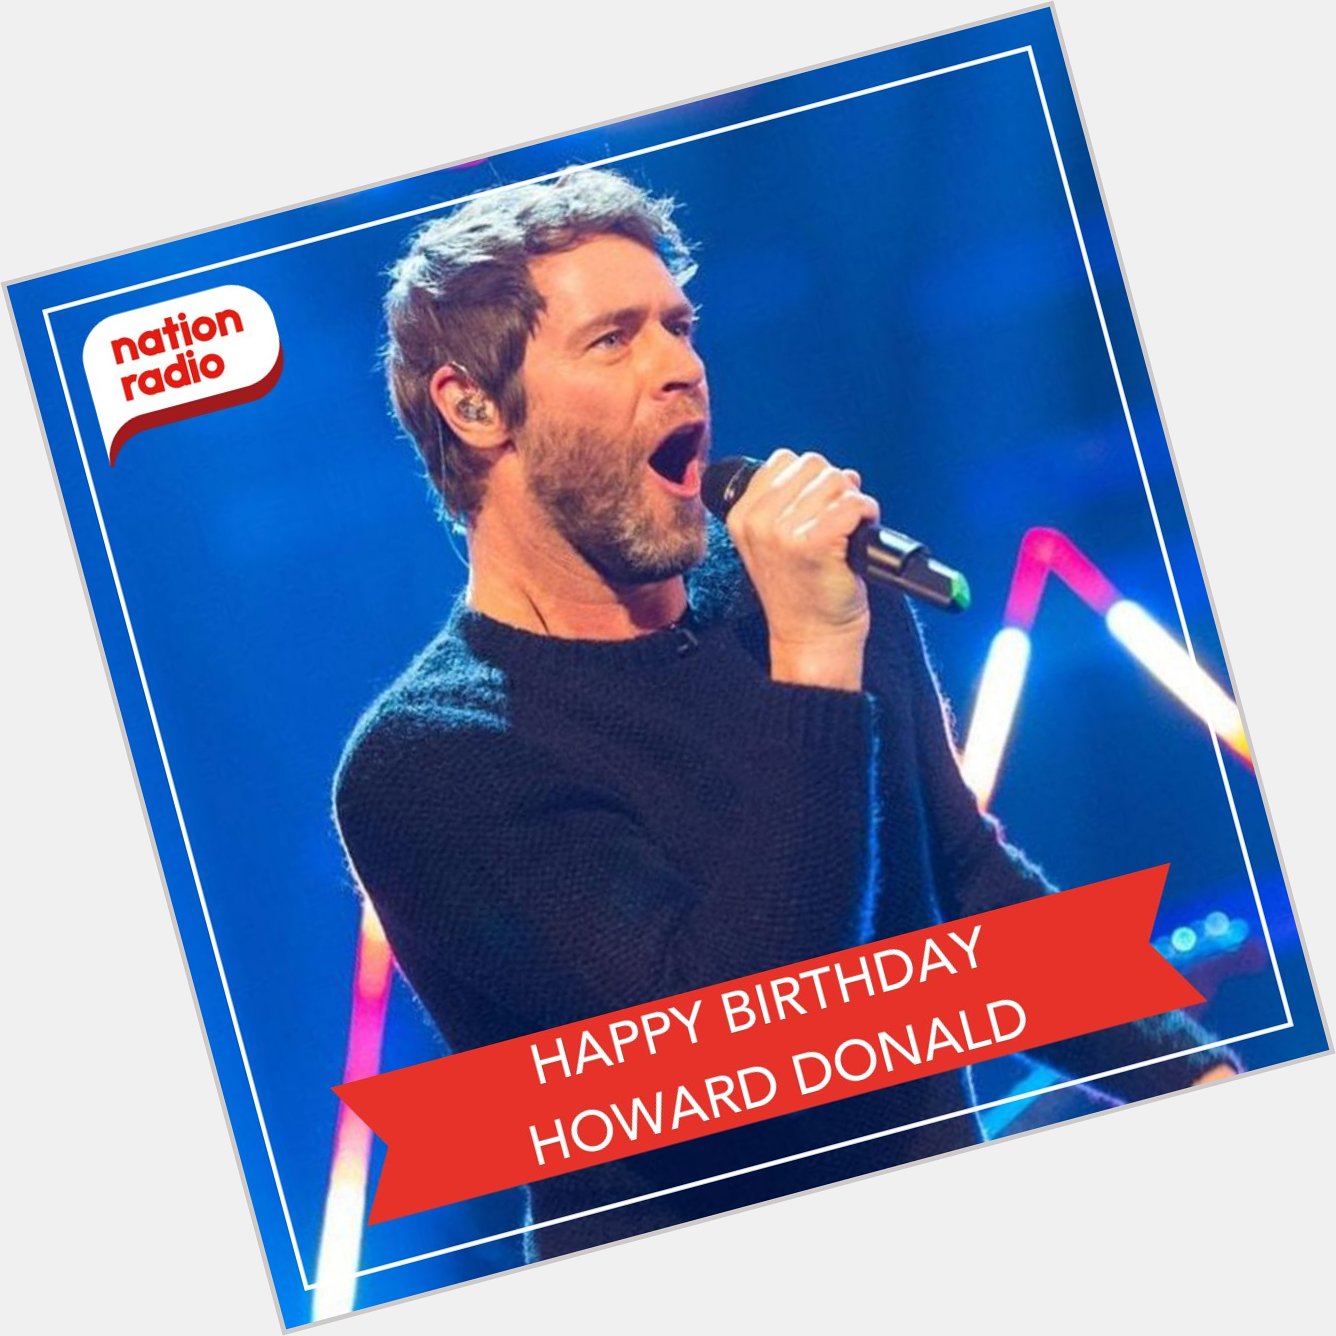 Happy birthday Take That\s Howard Donald, he\s 52 today! 